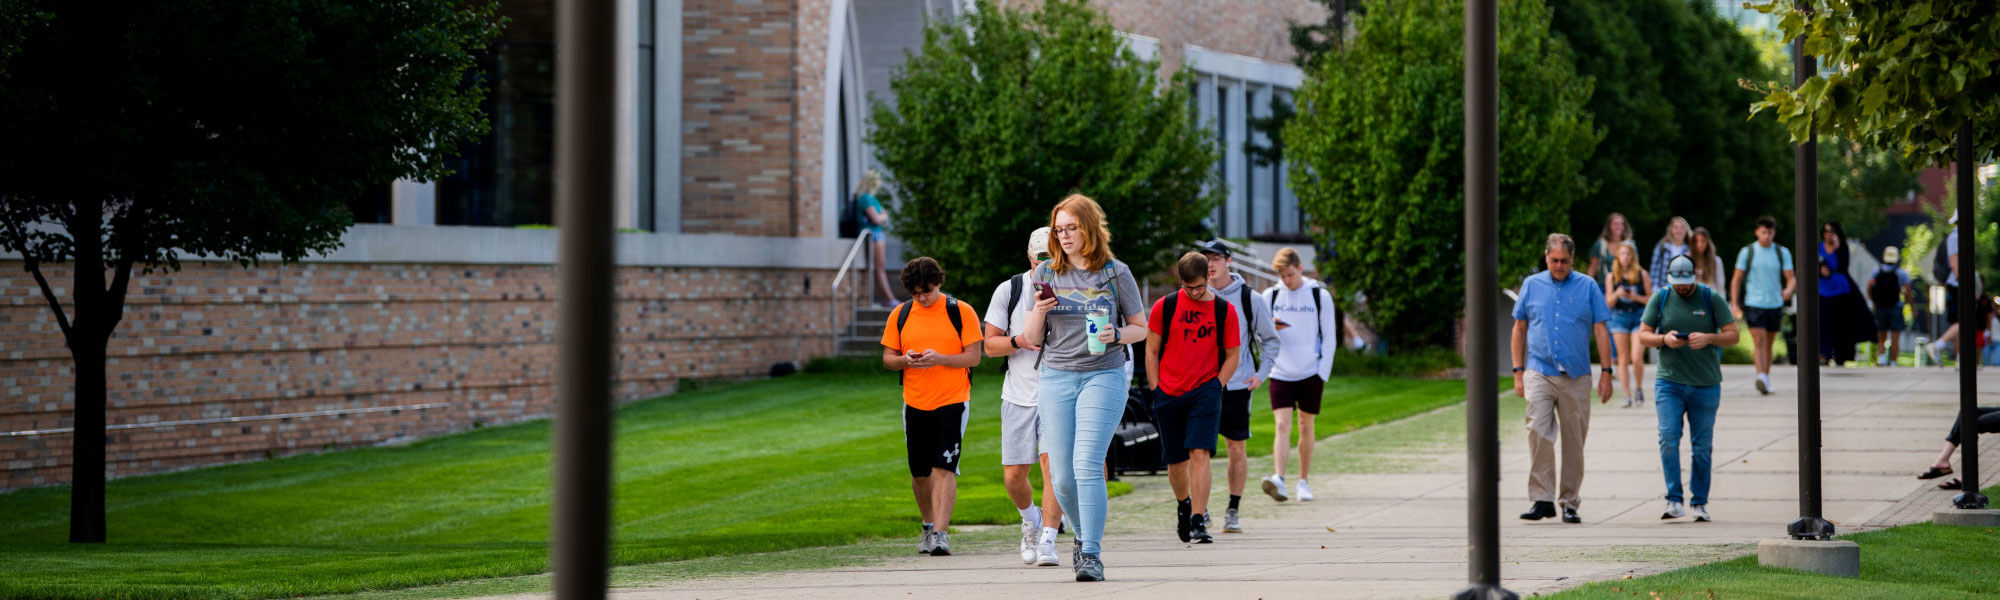 students walking downtown